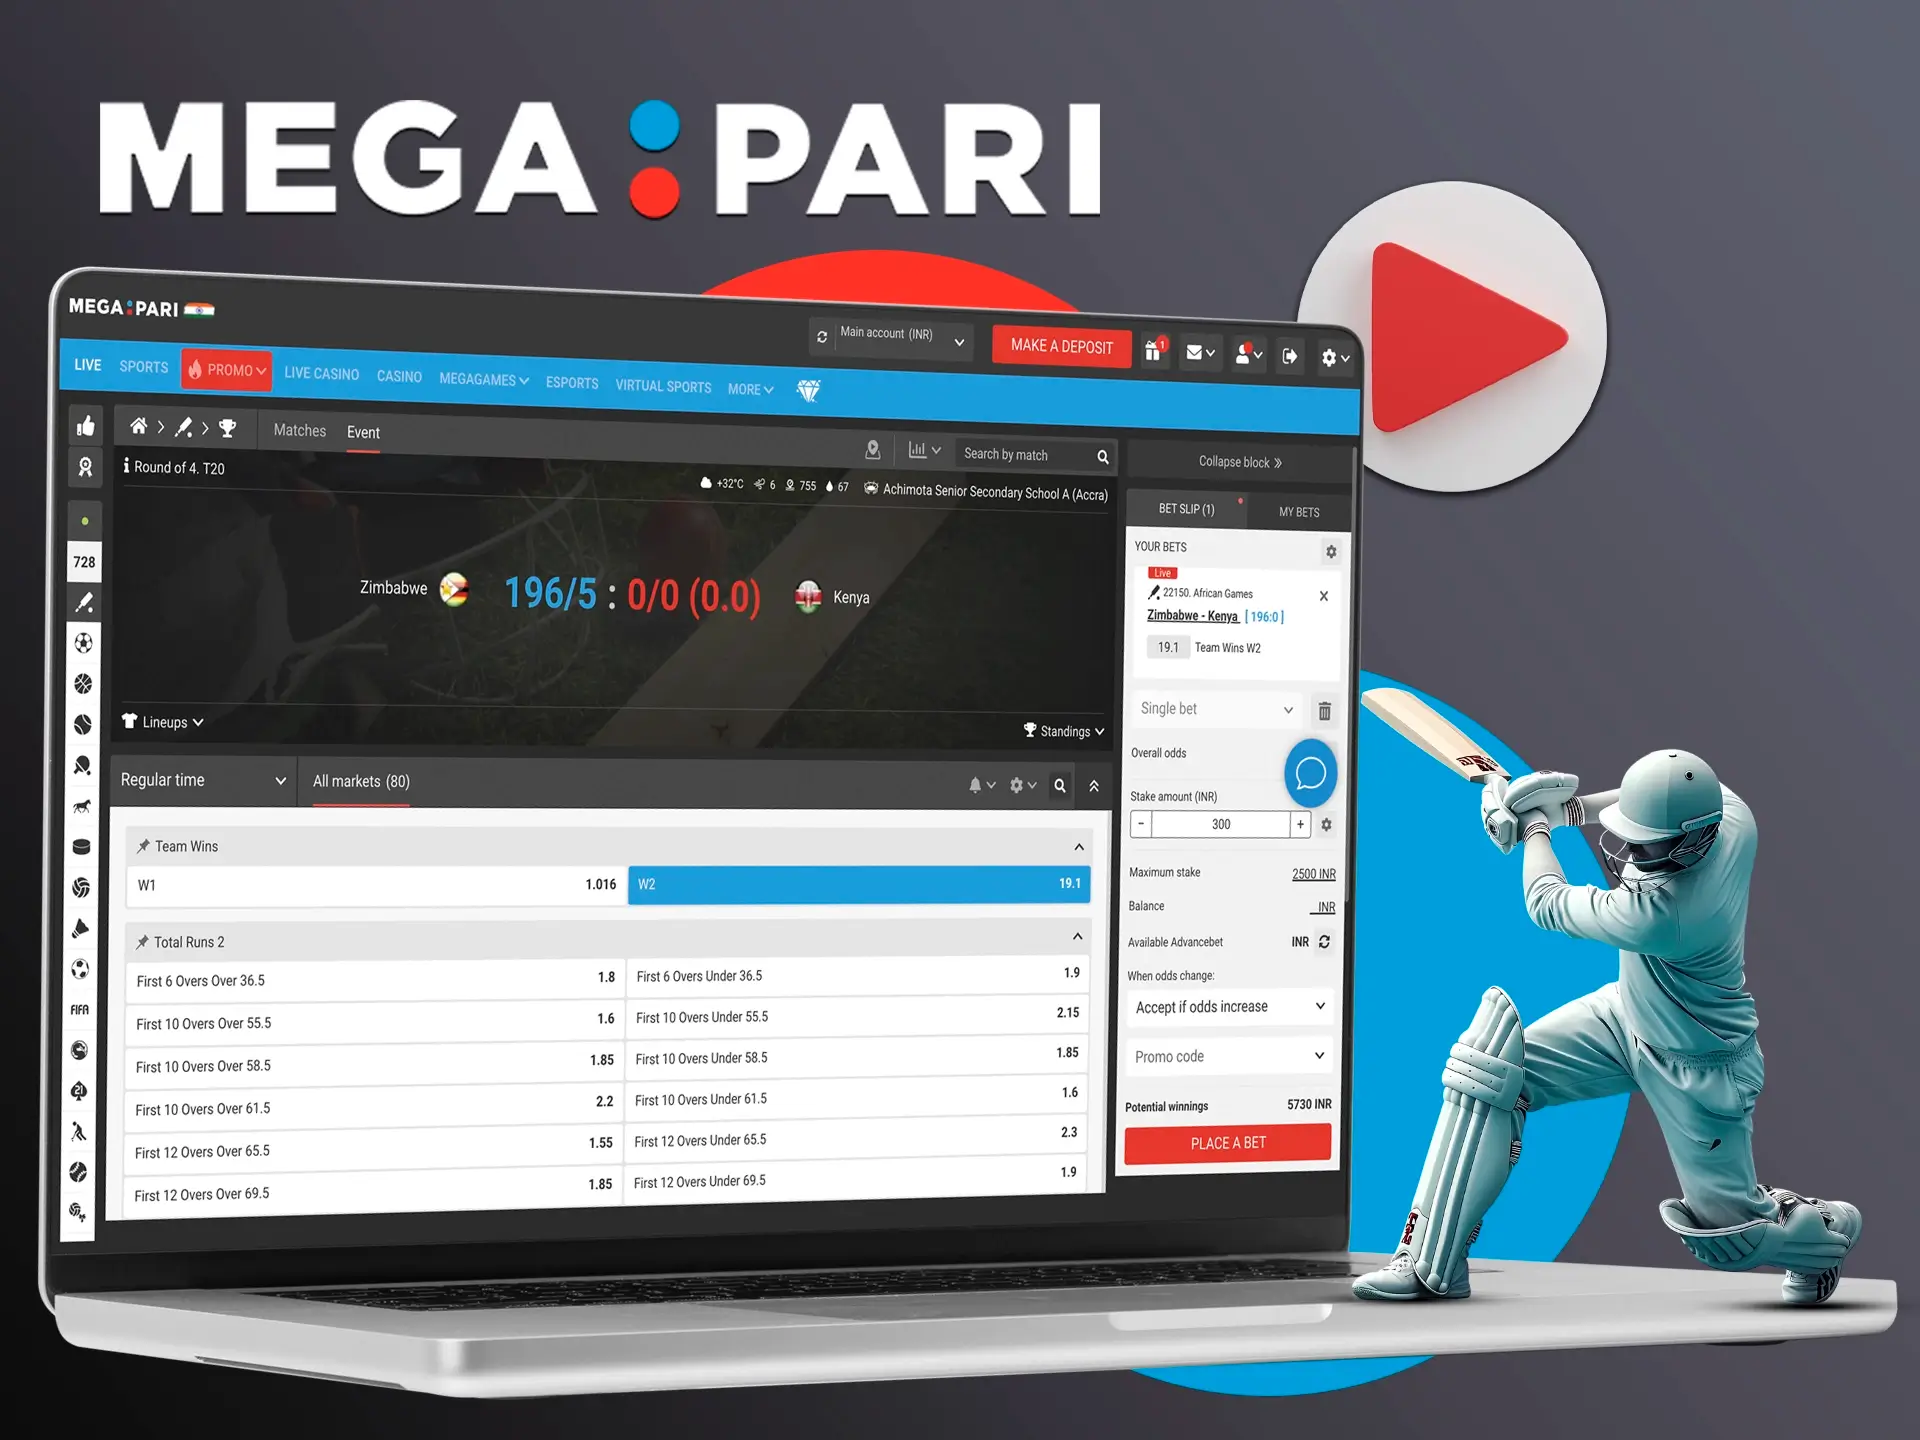 Watch the matches live and place your bets at Megapari based on the situation on the pitch.